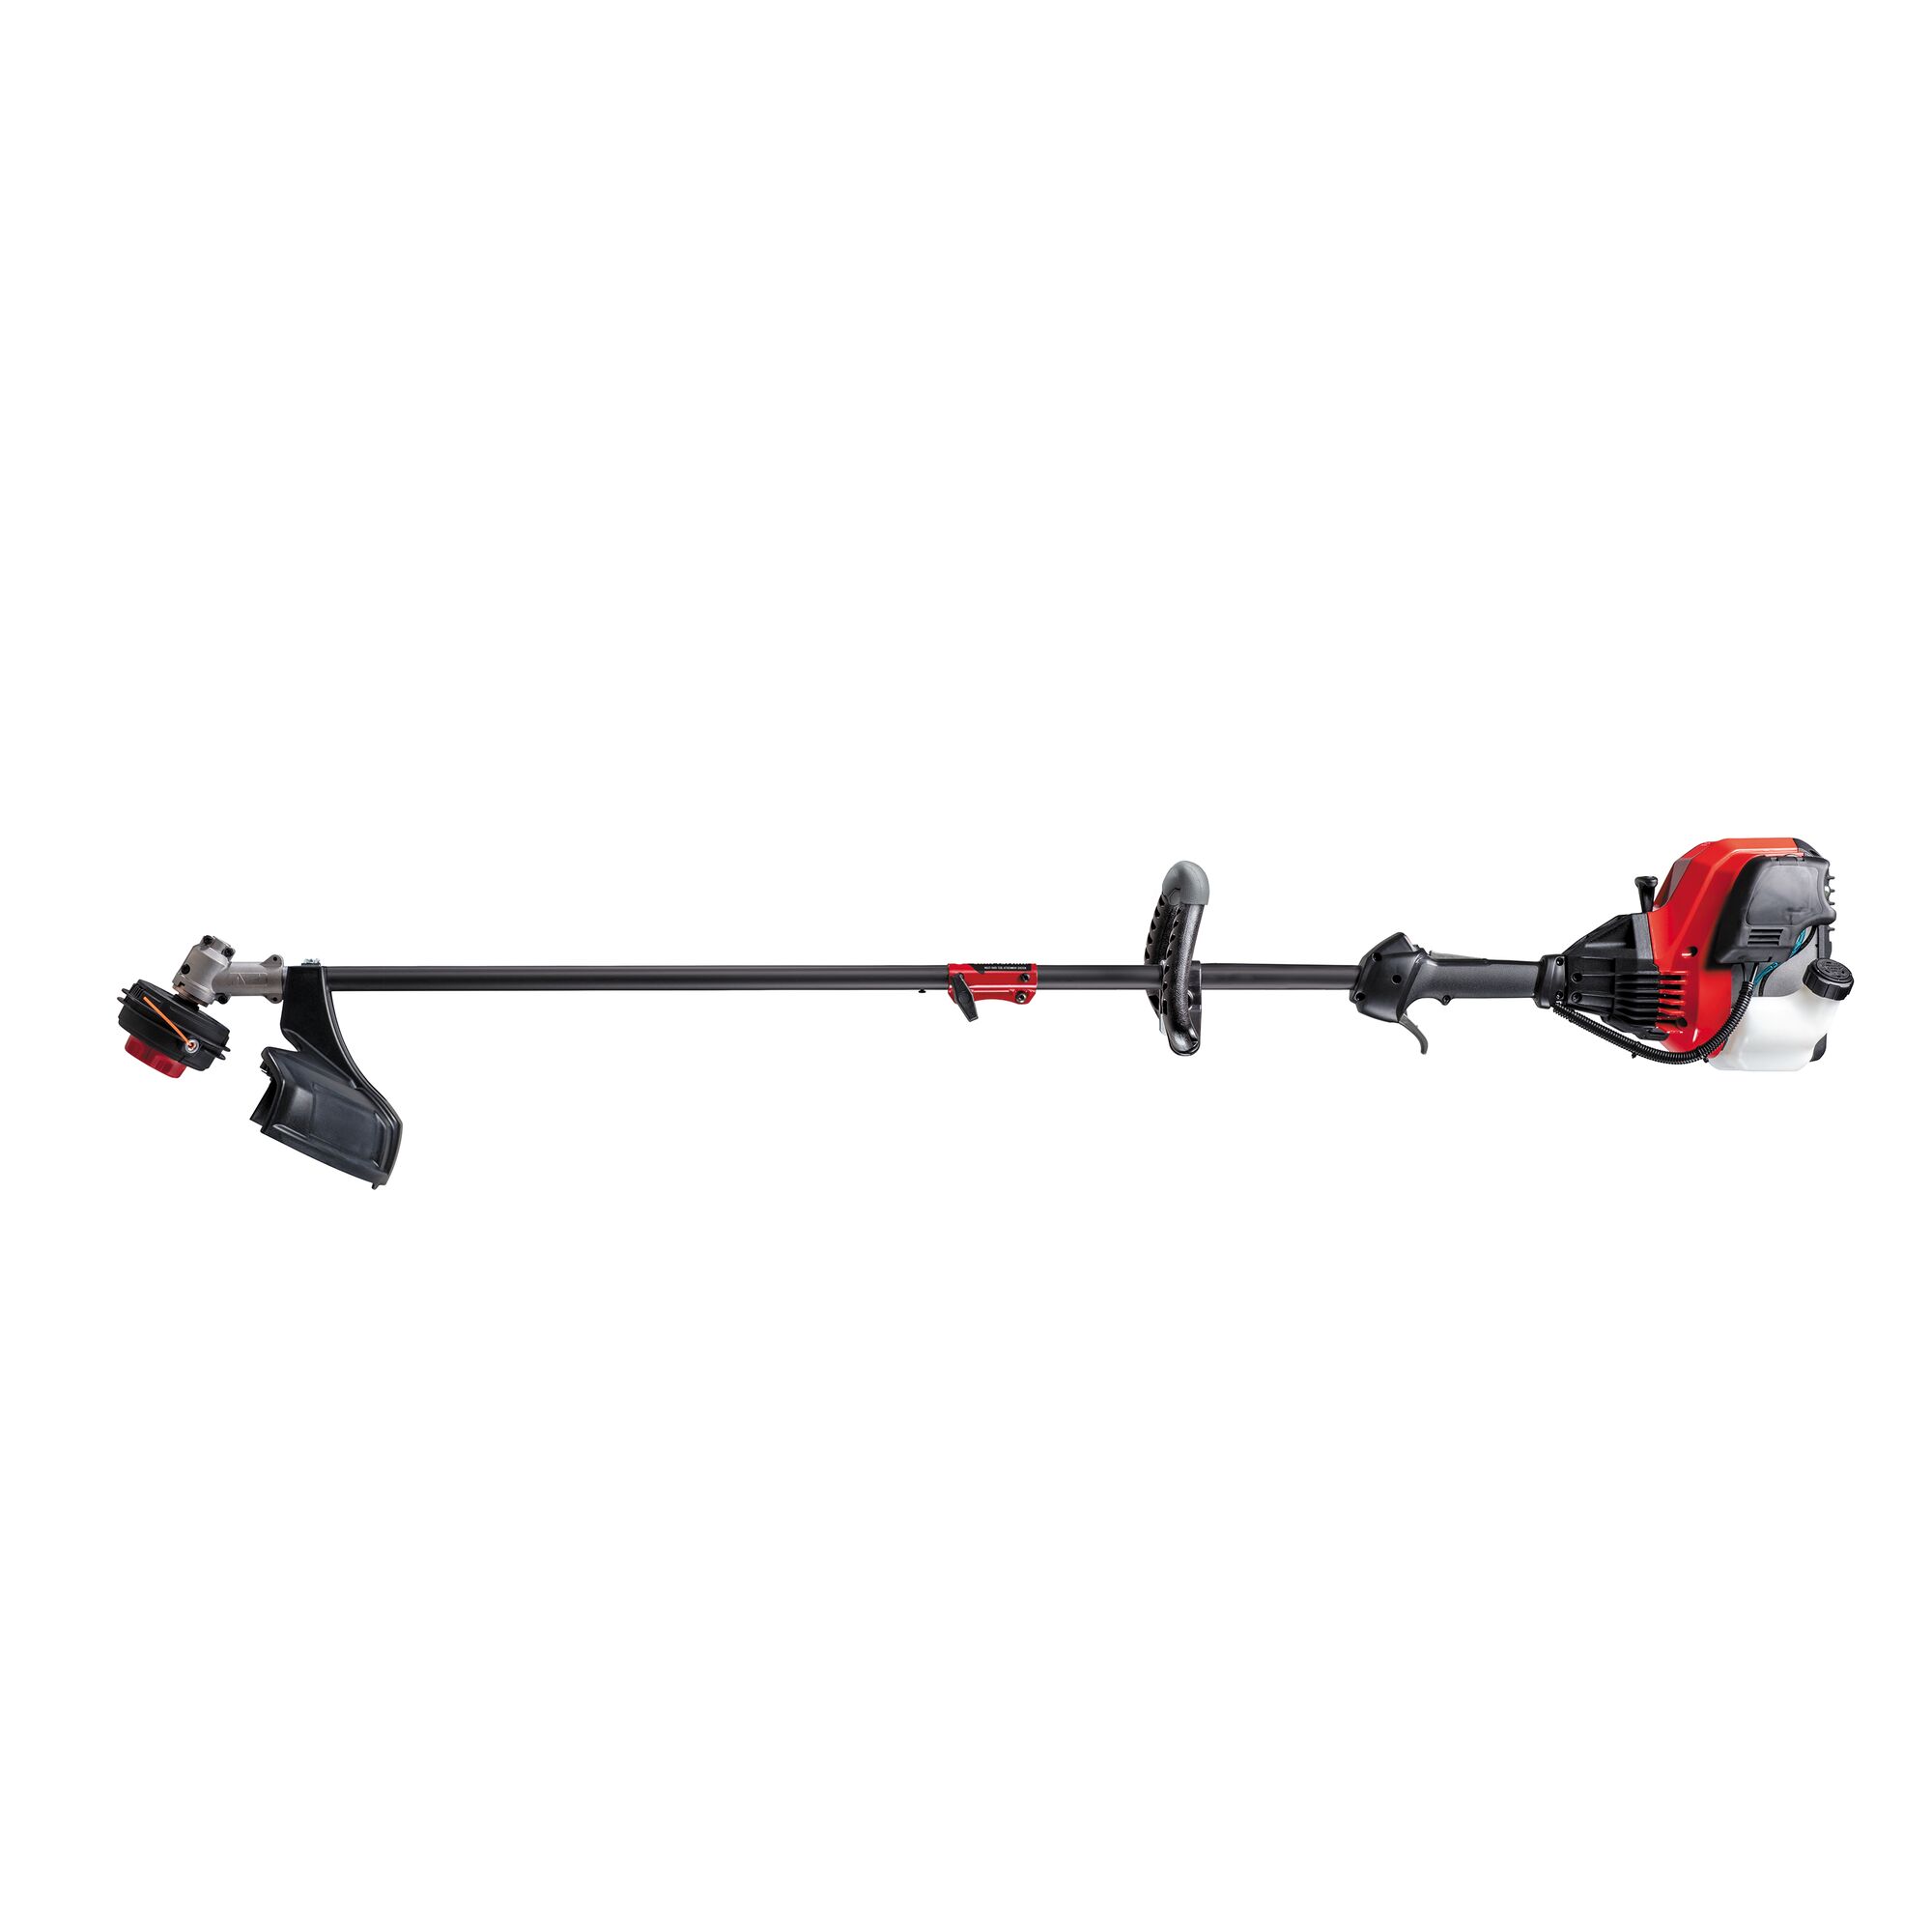 Profile of Weedwacker 30 C C 4 cycle 17 inch attachment capable straight shaft gas trimmer.